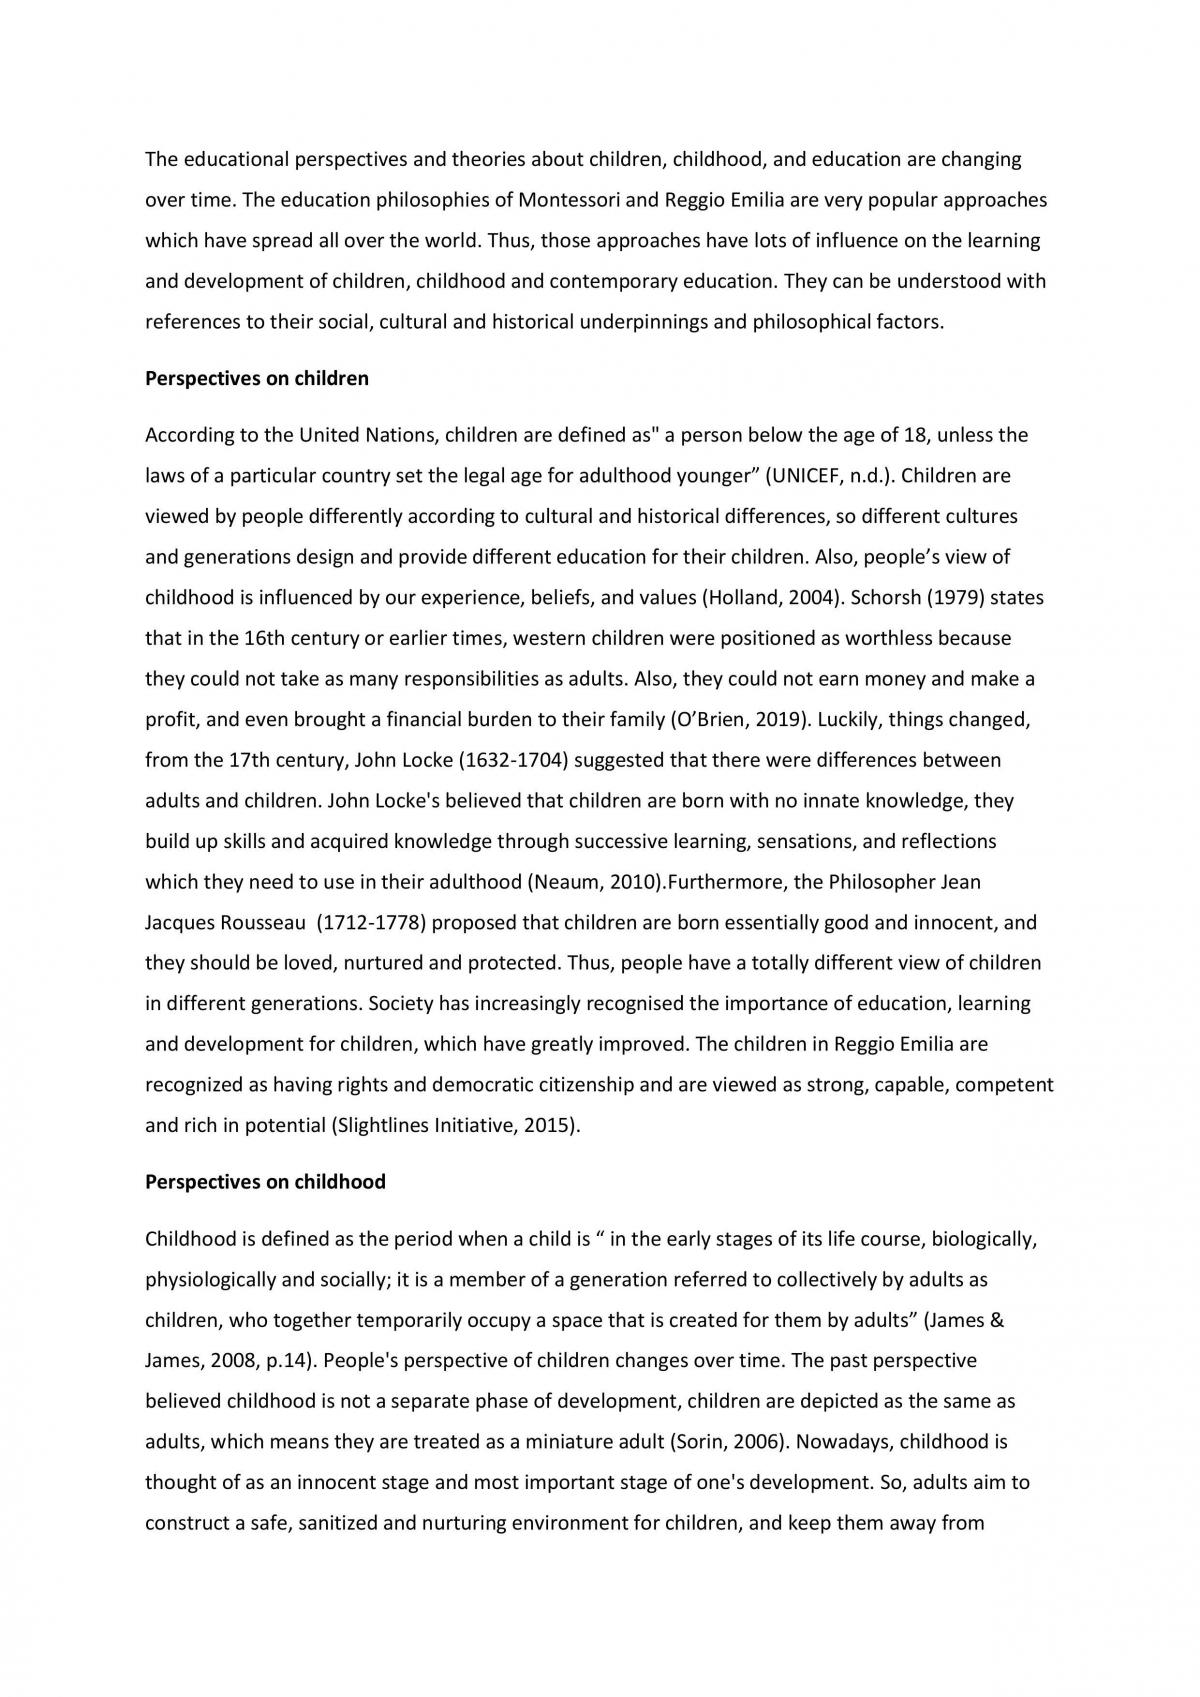 EDU20003 Assignment 1 - Page 2